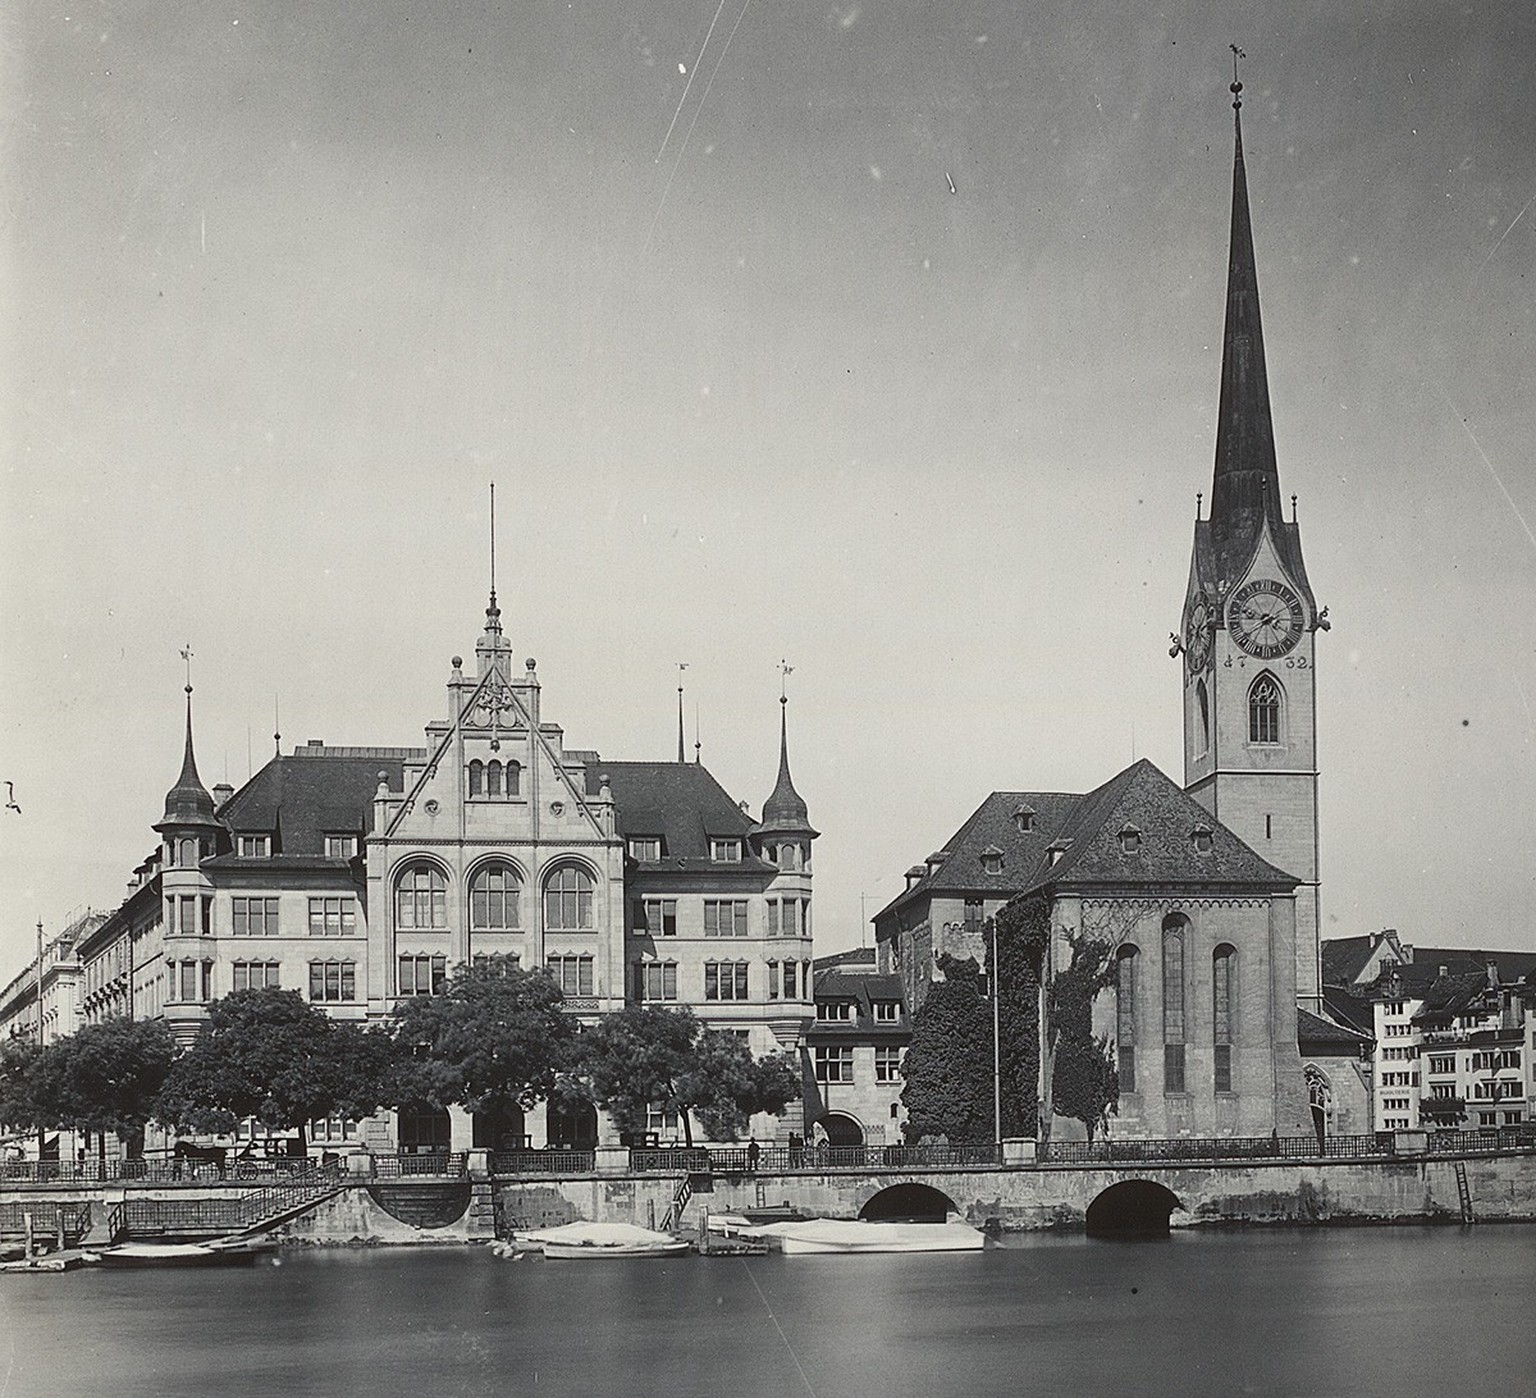 The Gull-designed Zurich Town Hall on the site of the former Fraumünster Monastery.  Photo taken around 1915. http://doi.org/10.3932/ethz-a-000015938